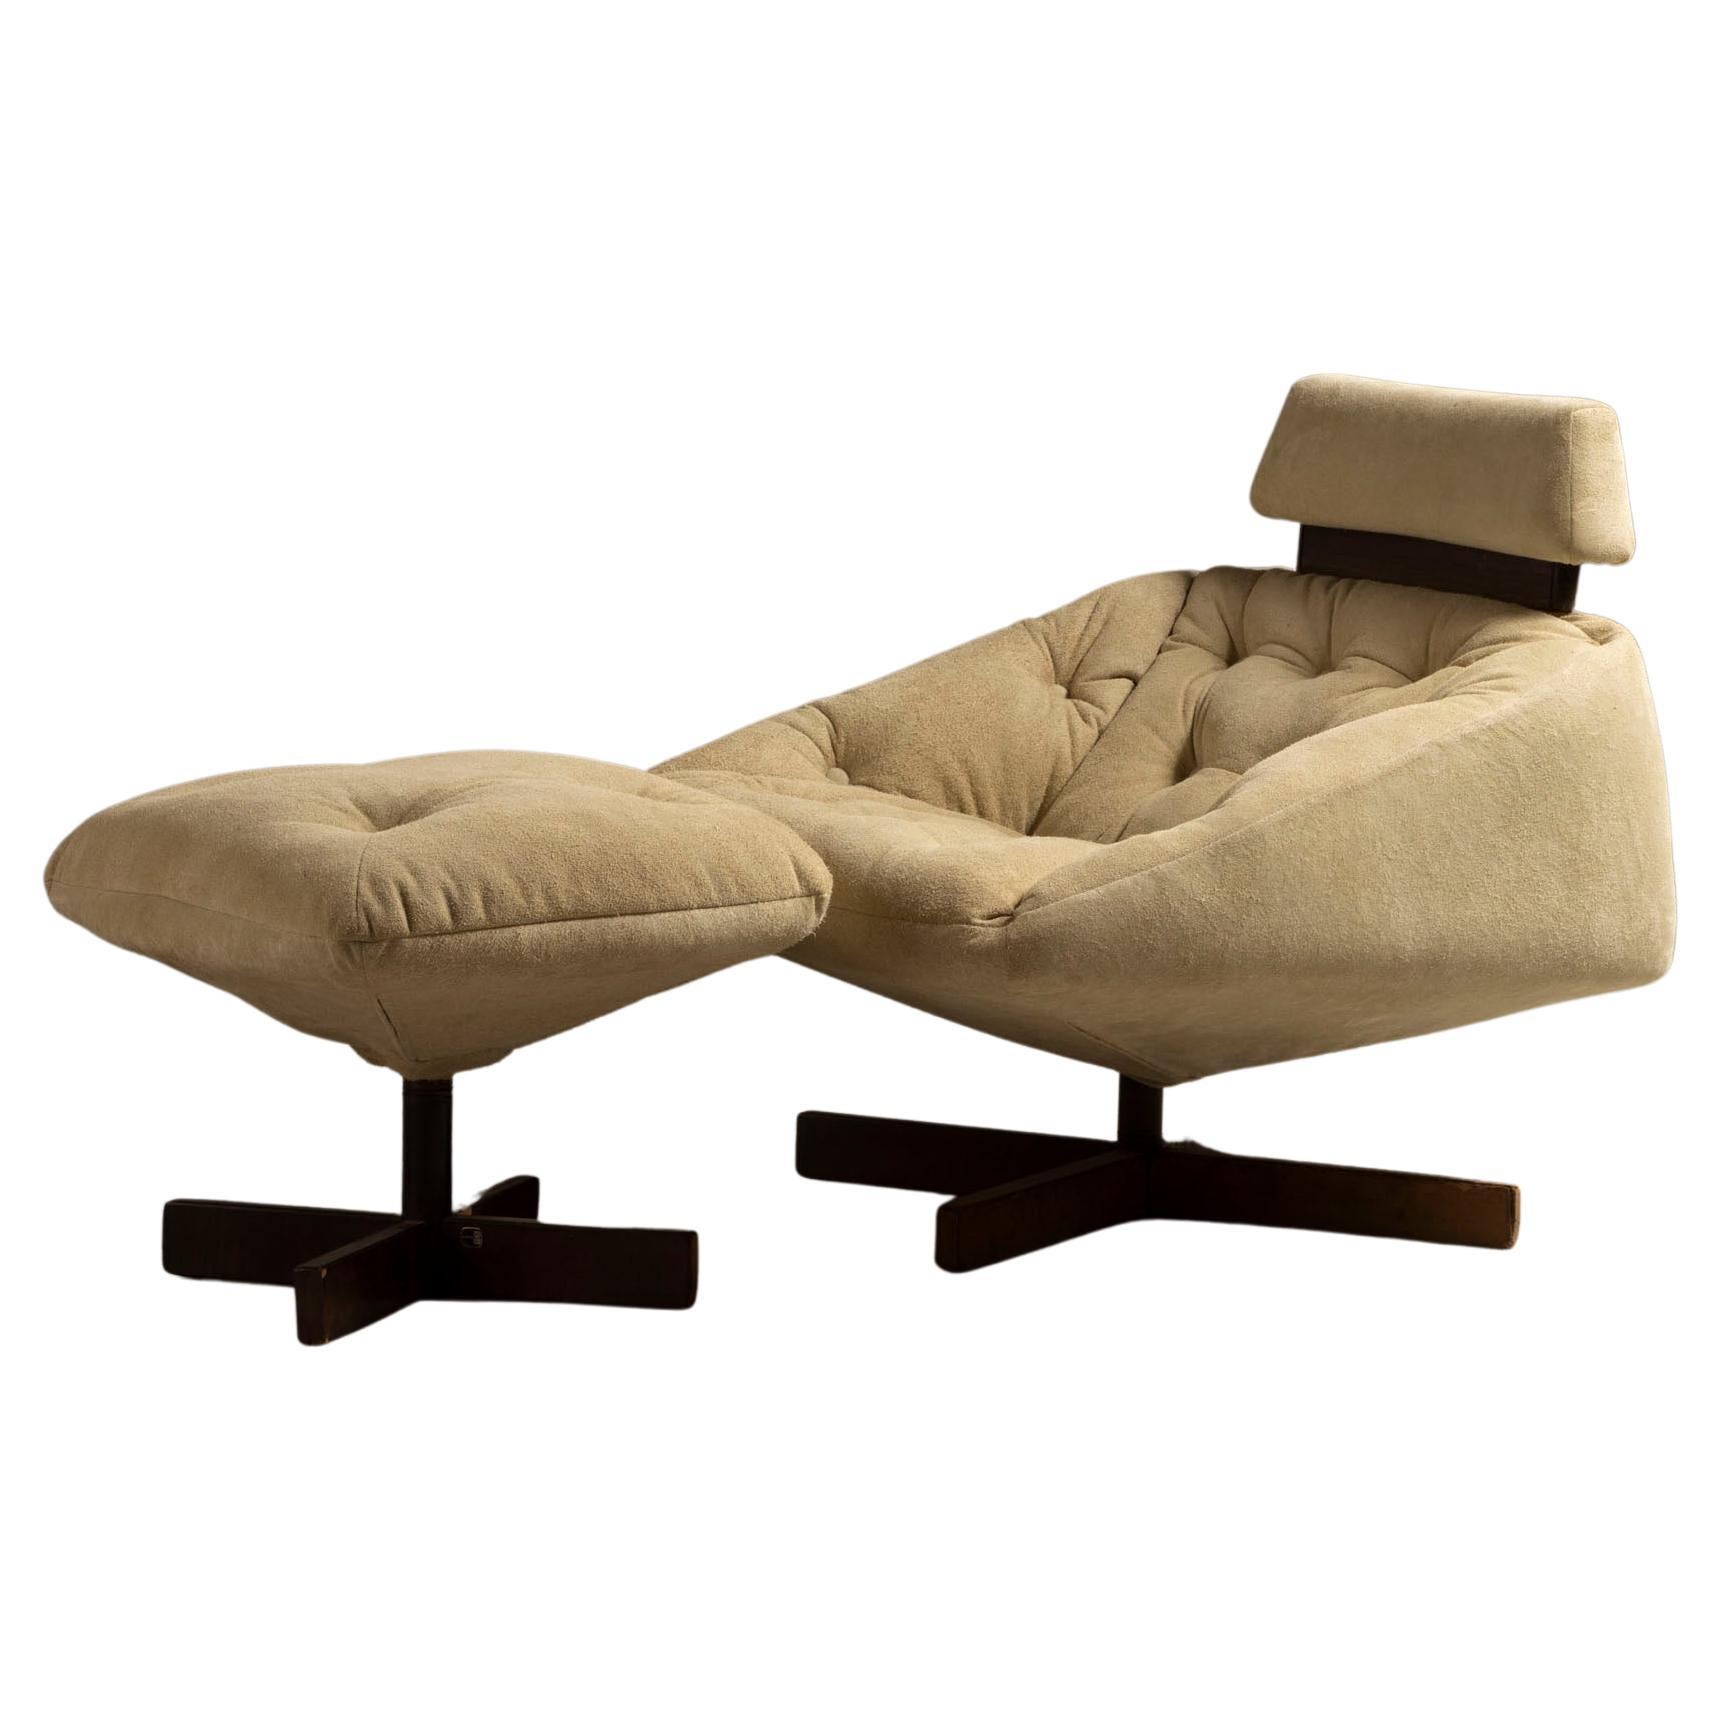 "MP-43 Lounge Chair and Ottoman by Percival Lafer, Brazilian Mid-Century Modern For Sale